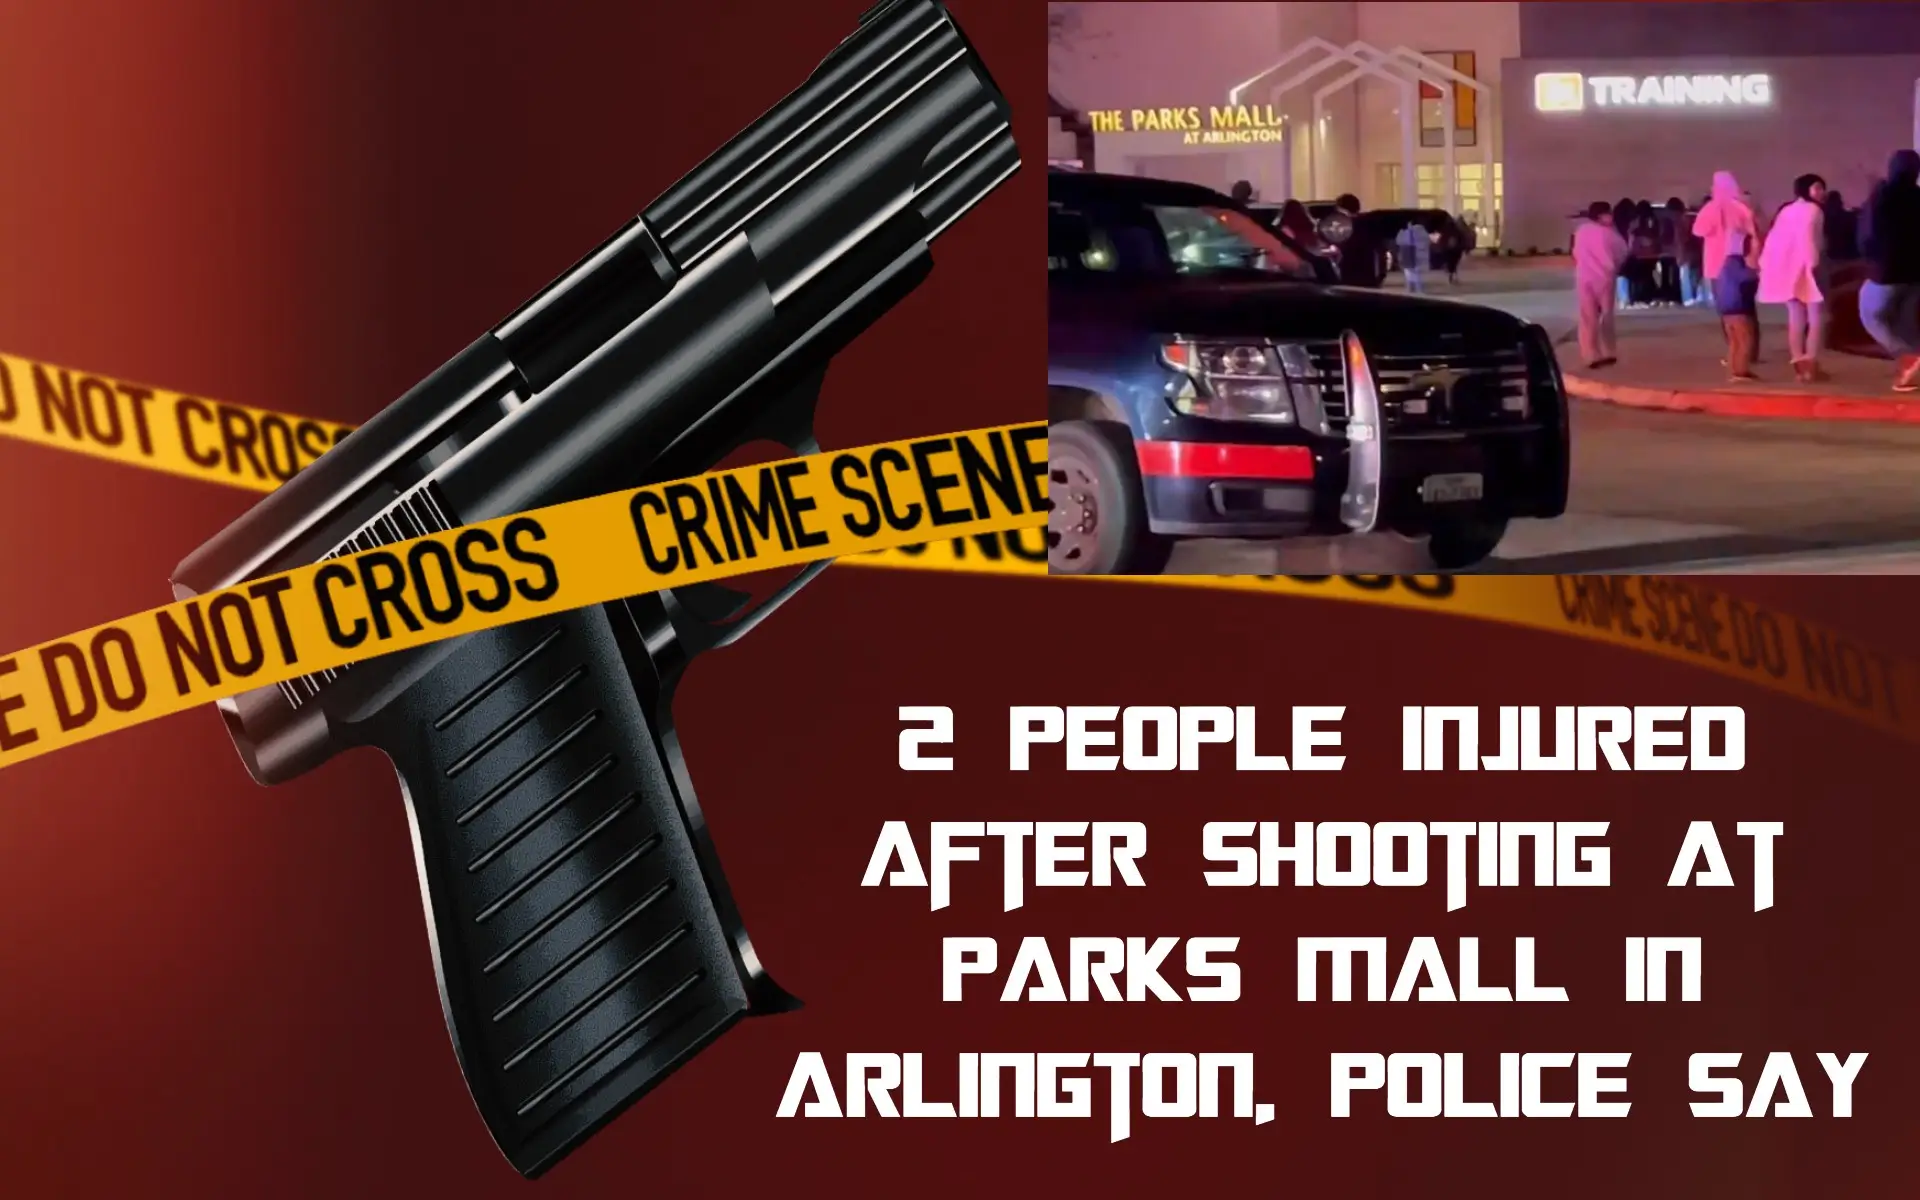 Two people injured after shooting at Parks Mall in Arlington